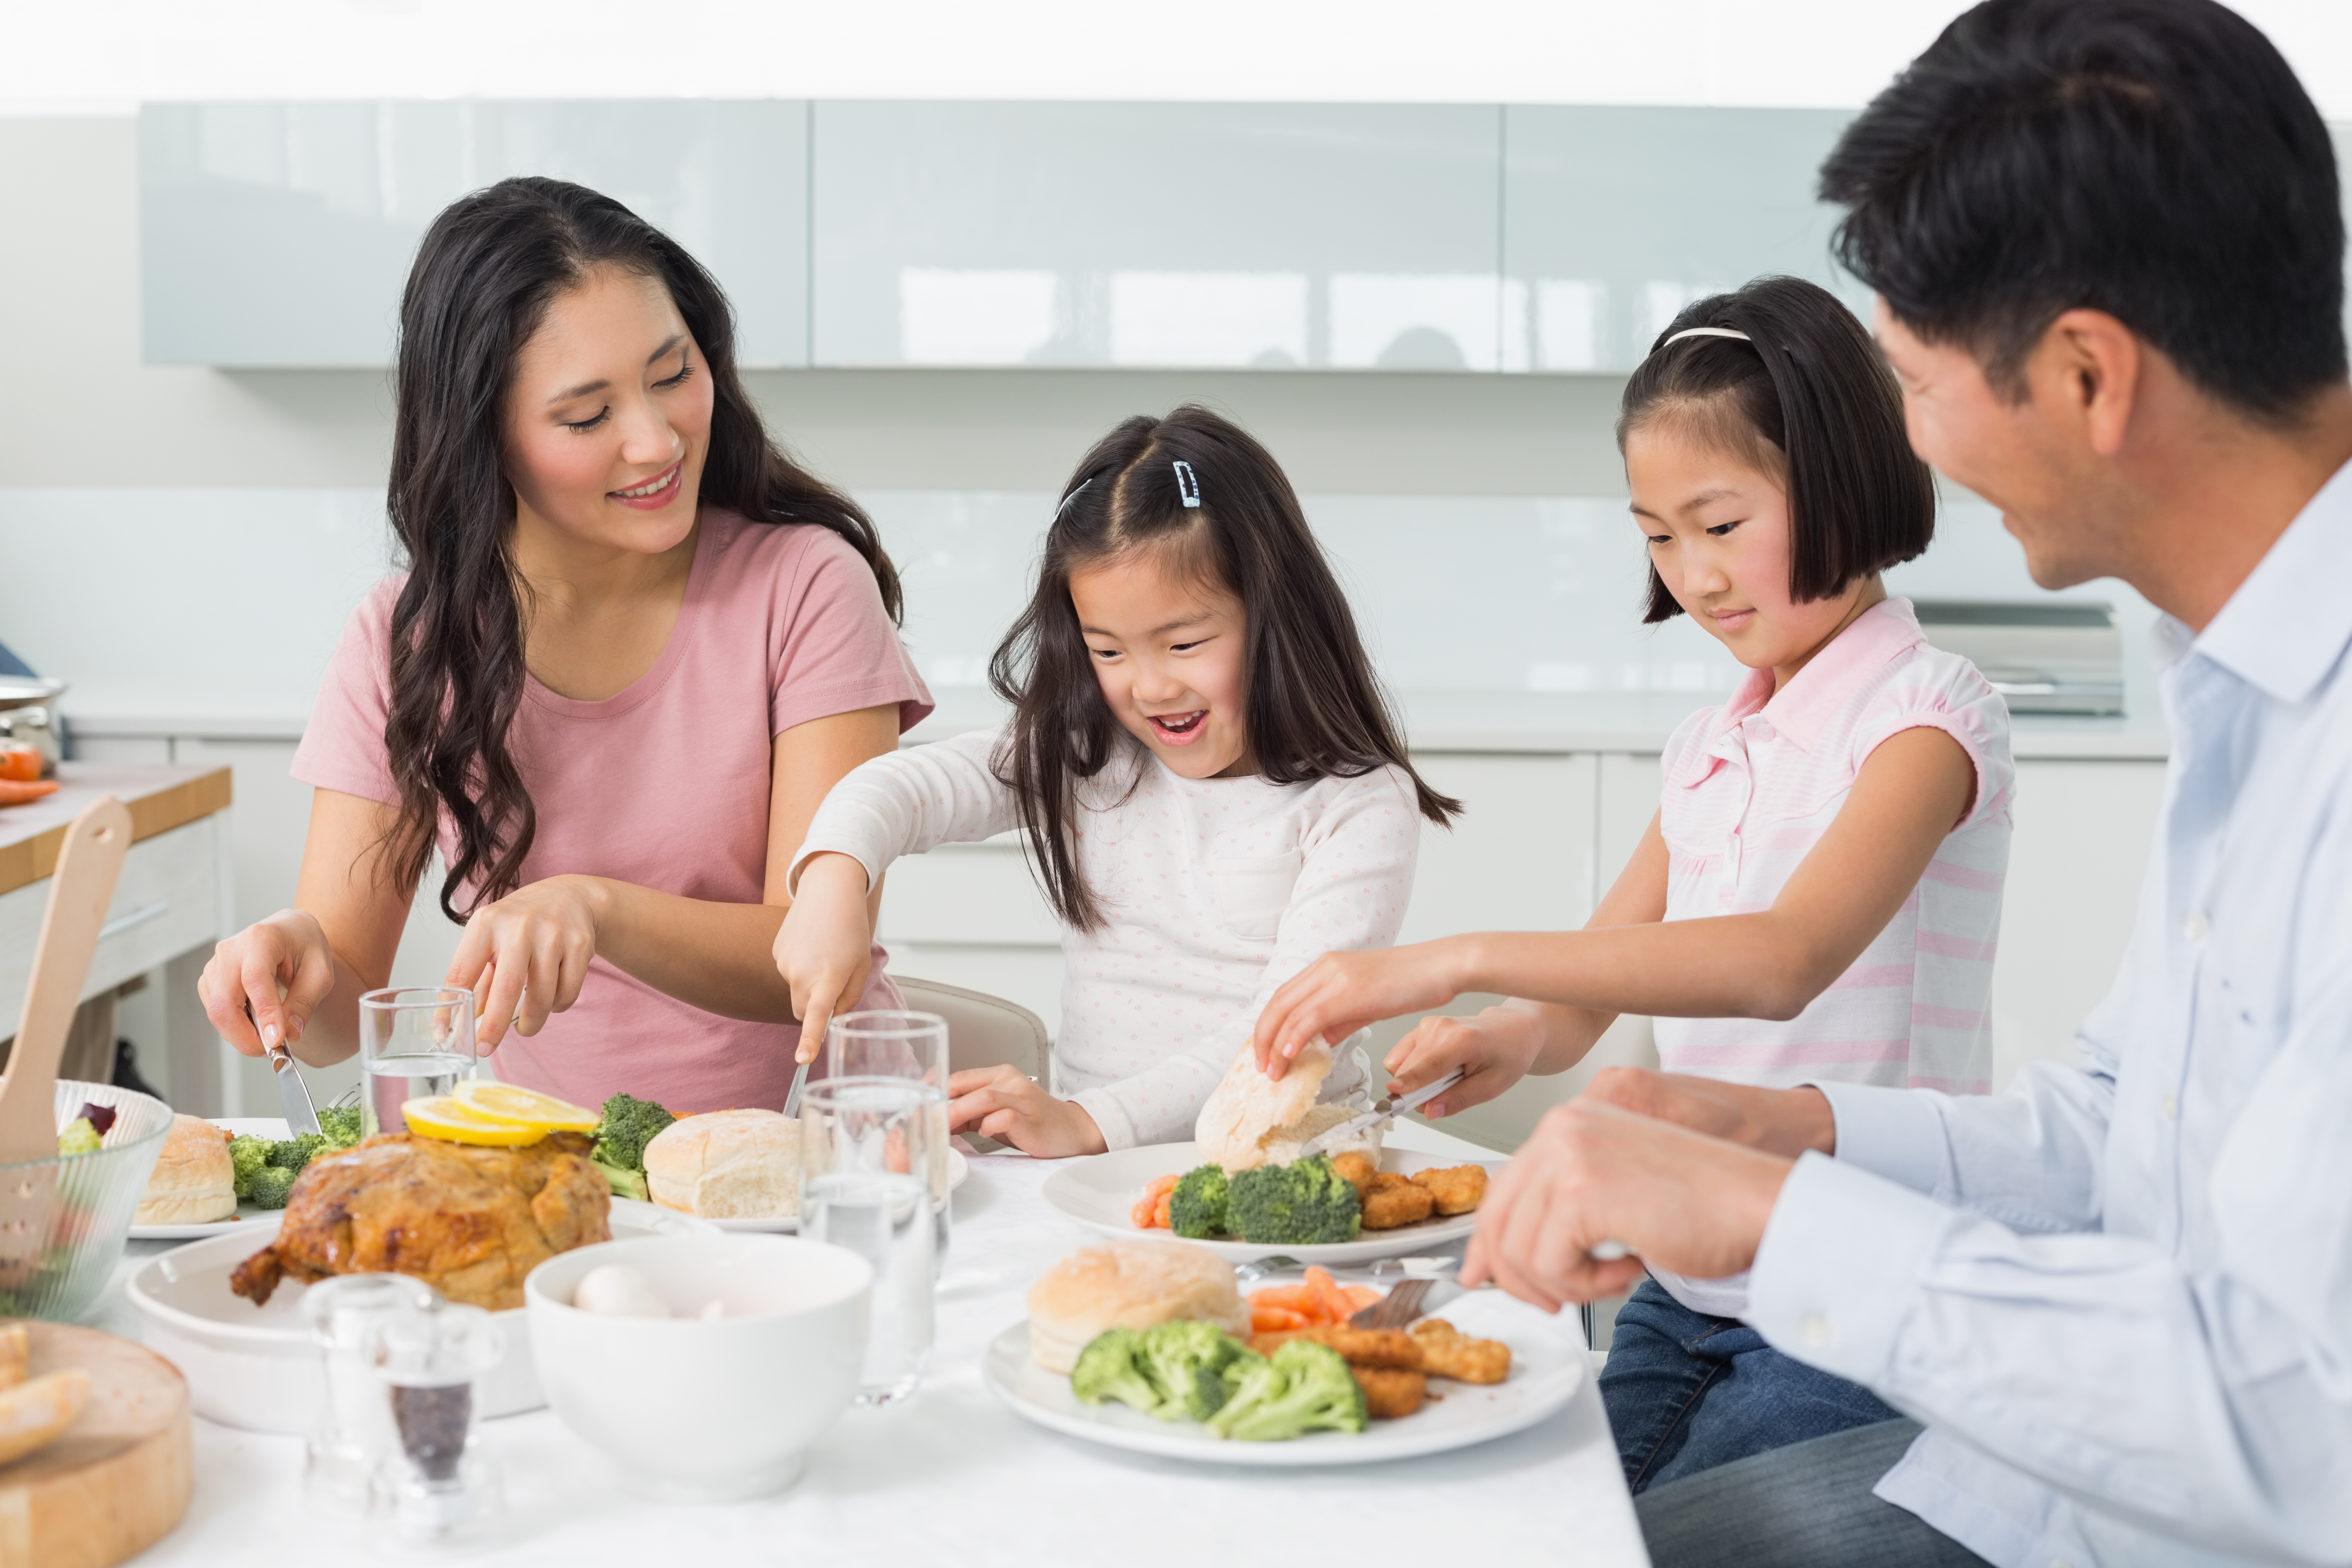 Why Eating Dinner Together at Home is So Important for Families